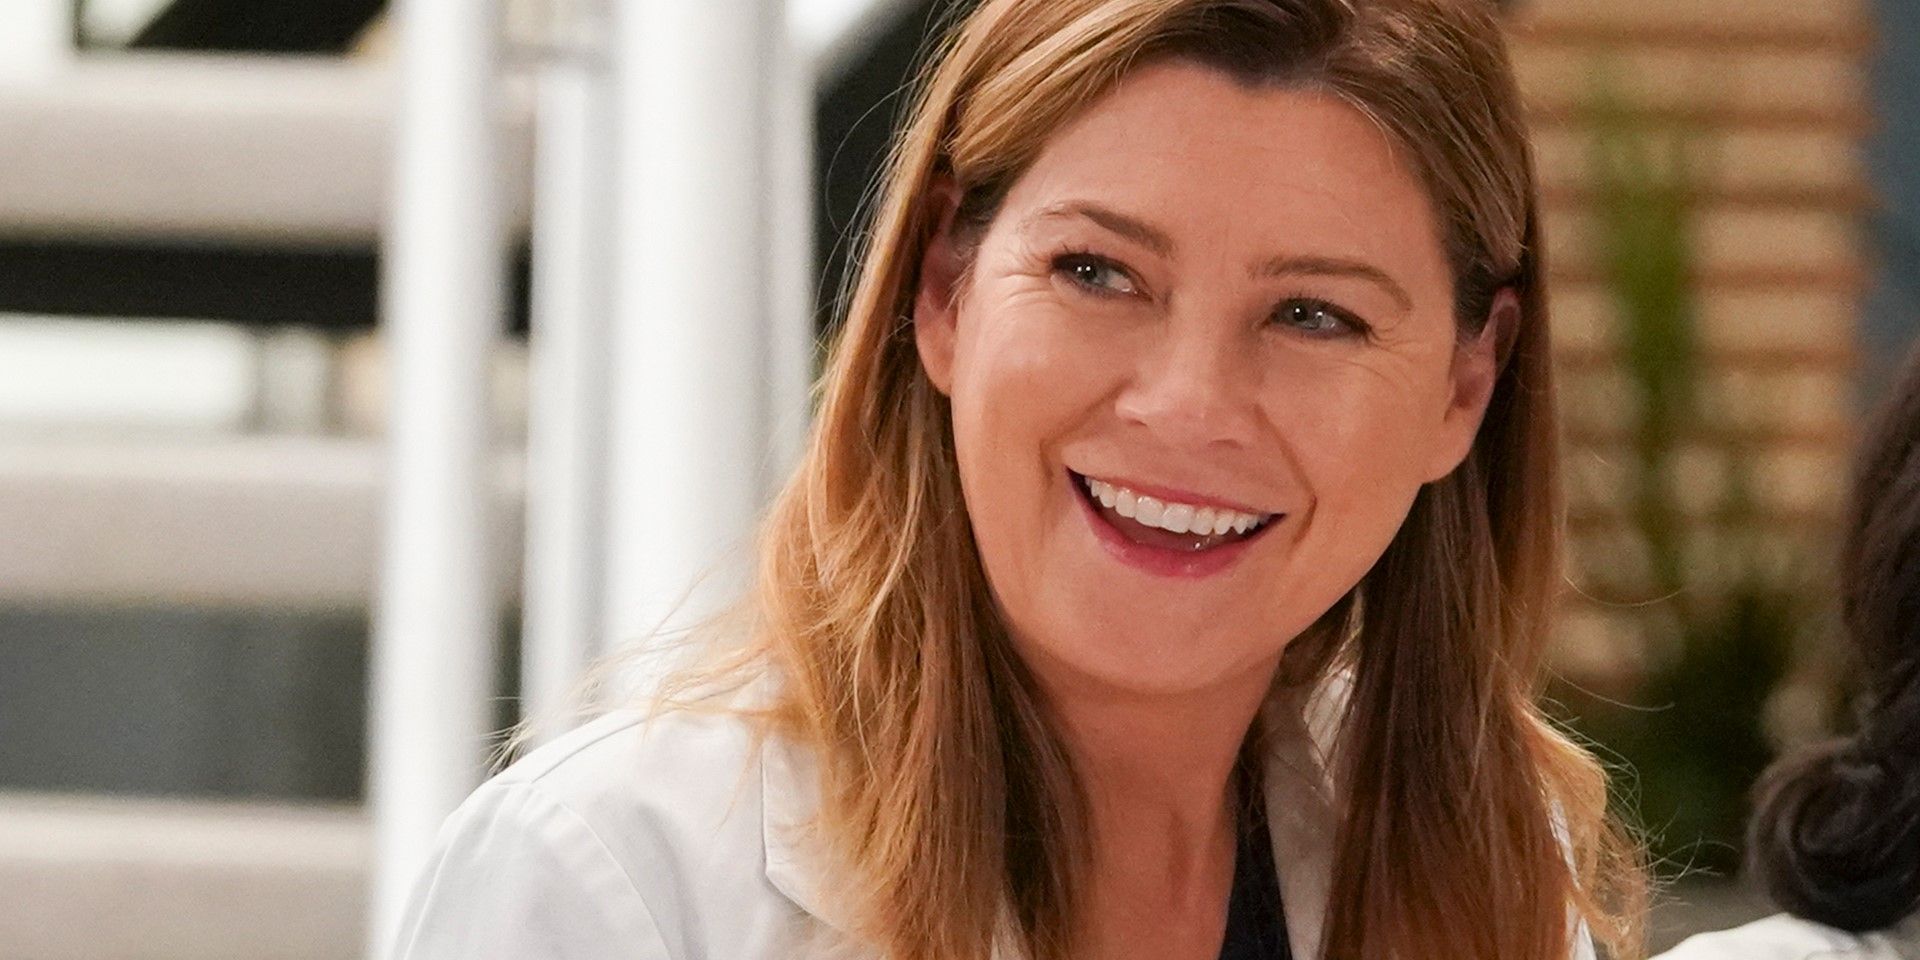 Meredith Grey smiling in Grey's Anatomy